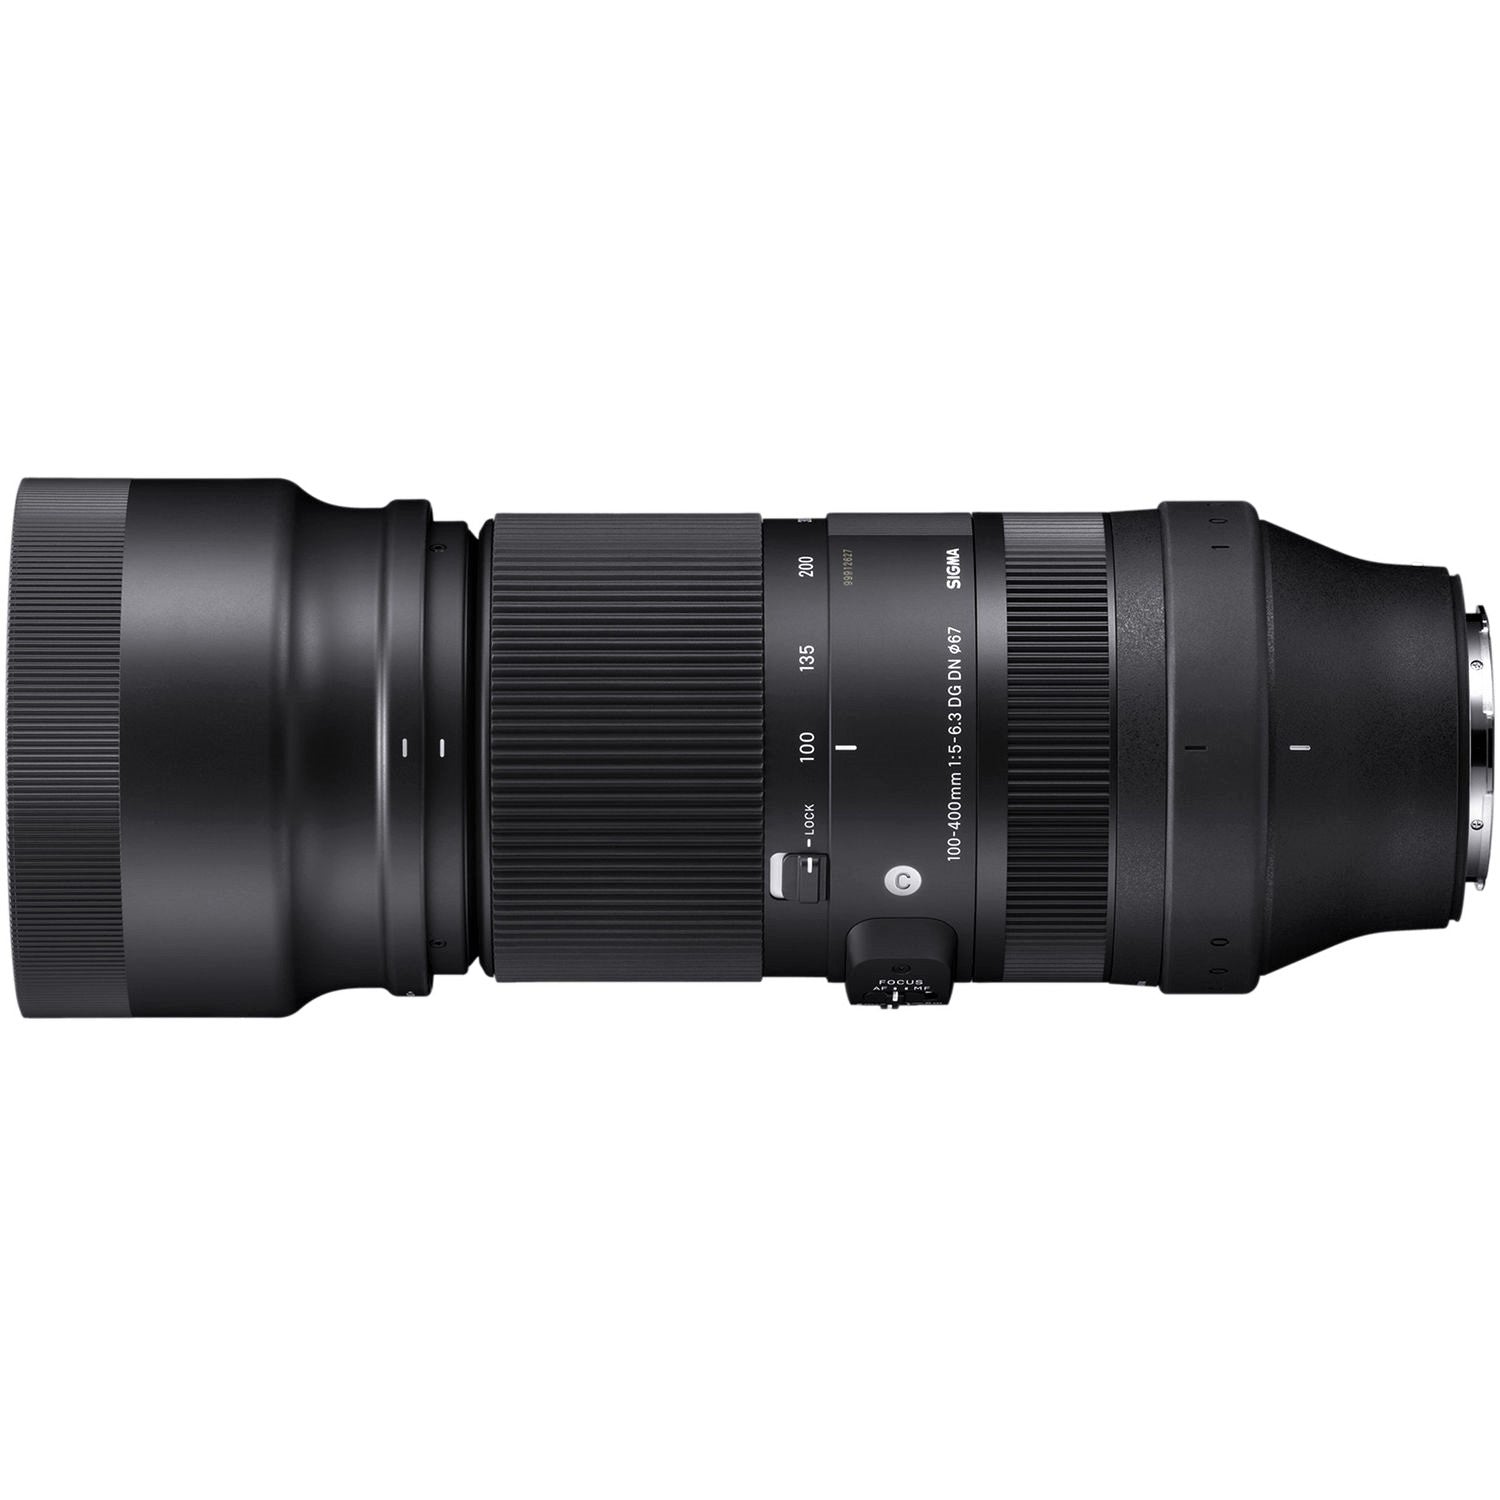 Sigma 100-400mm f/5-6.3 DG DN OS Contemporary Lens for Leica L - Side View